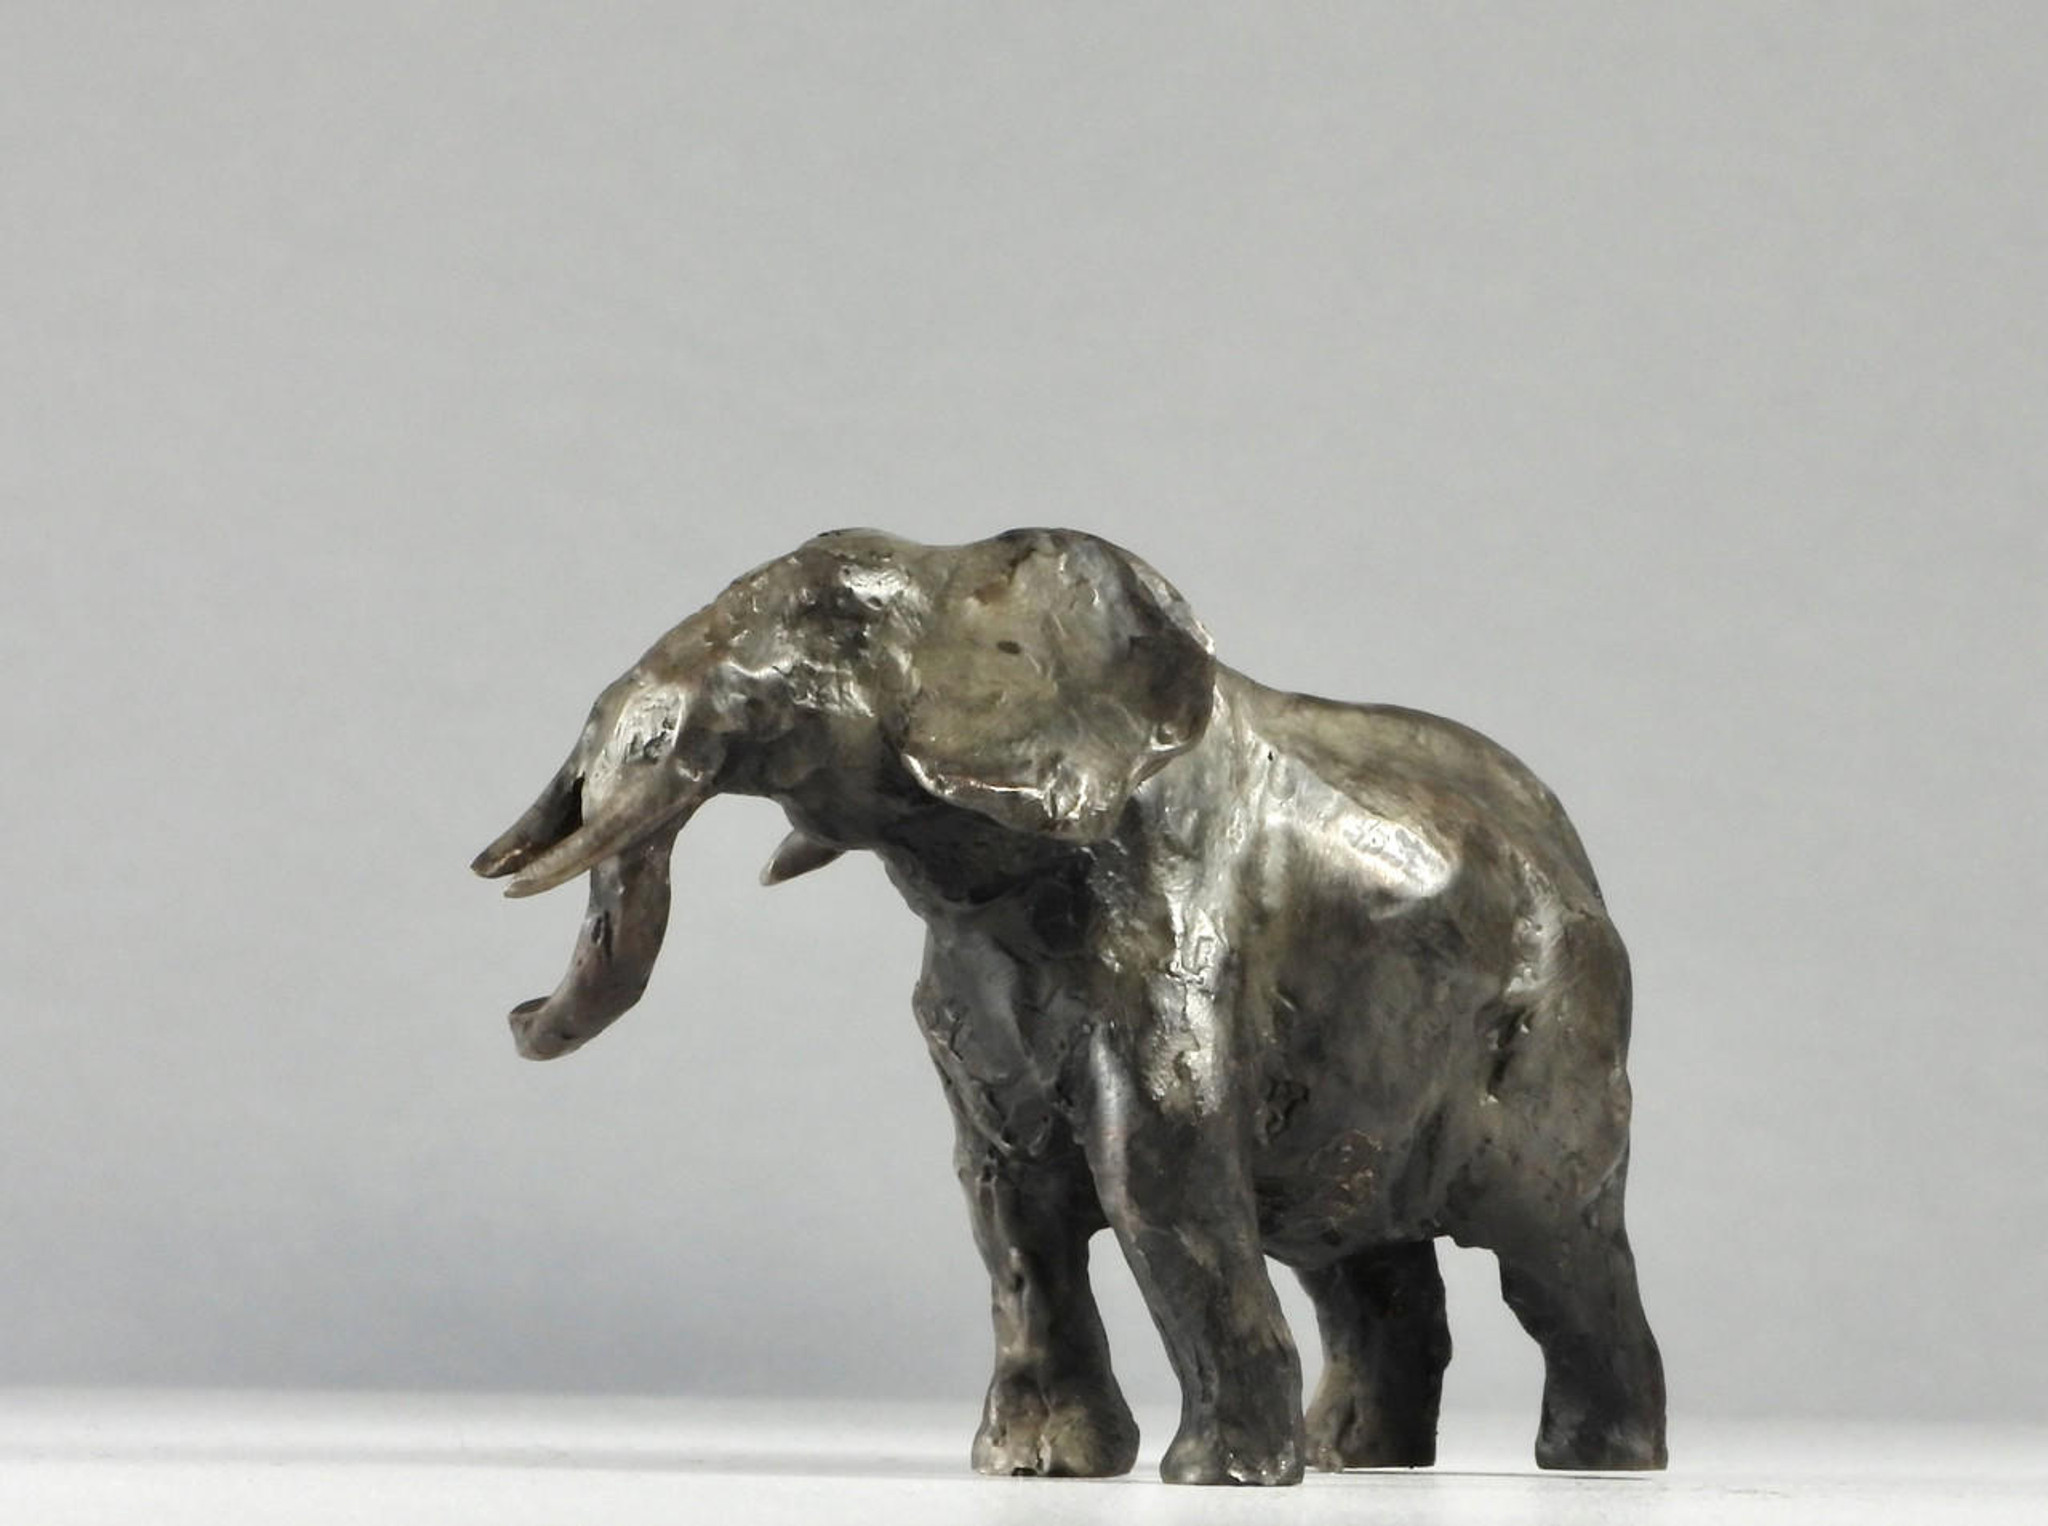 Tiny Giant I, 2.5", Miniature Bronze Elephant Sculpture by Kindrie Grove of Canada | available in the elk & HAMMER Gallery of Bozeman, Montana; curated by Ashley Childs, artist, maker, owner and creative director of elk & HAMMER.